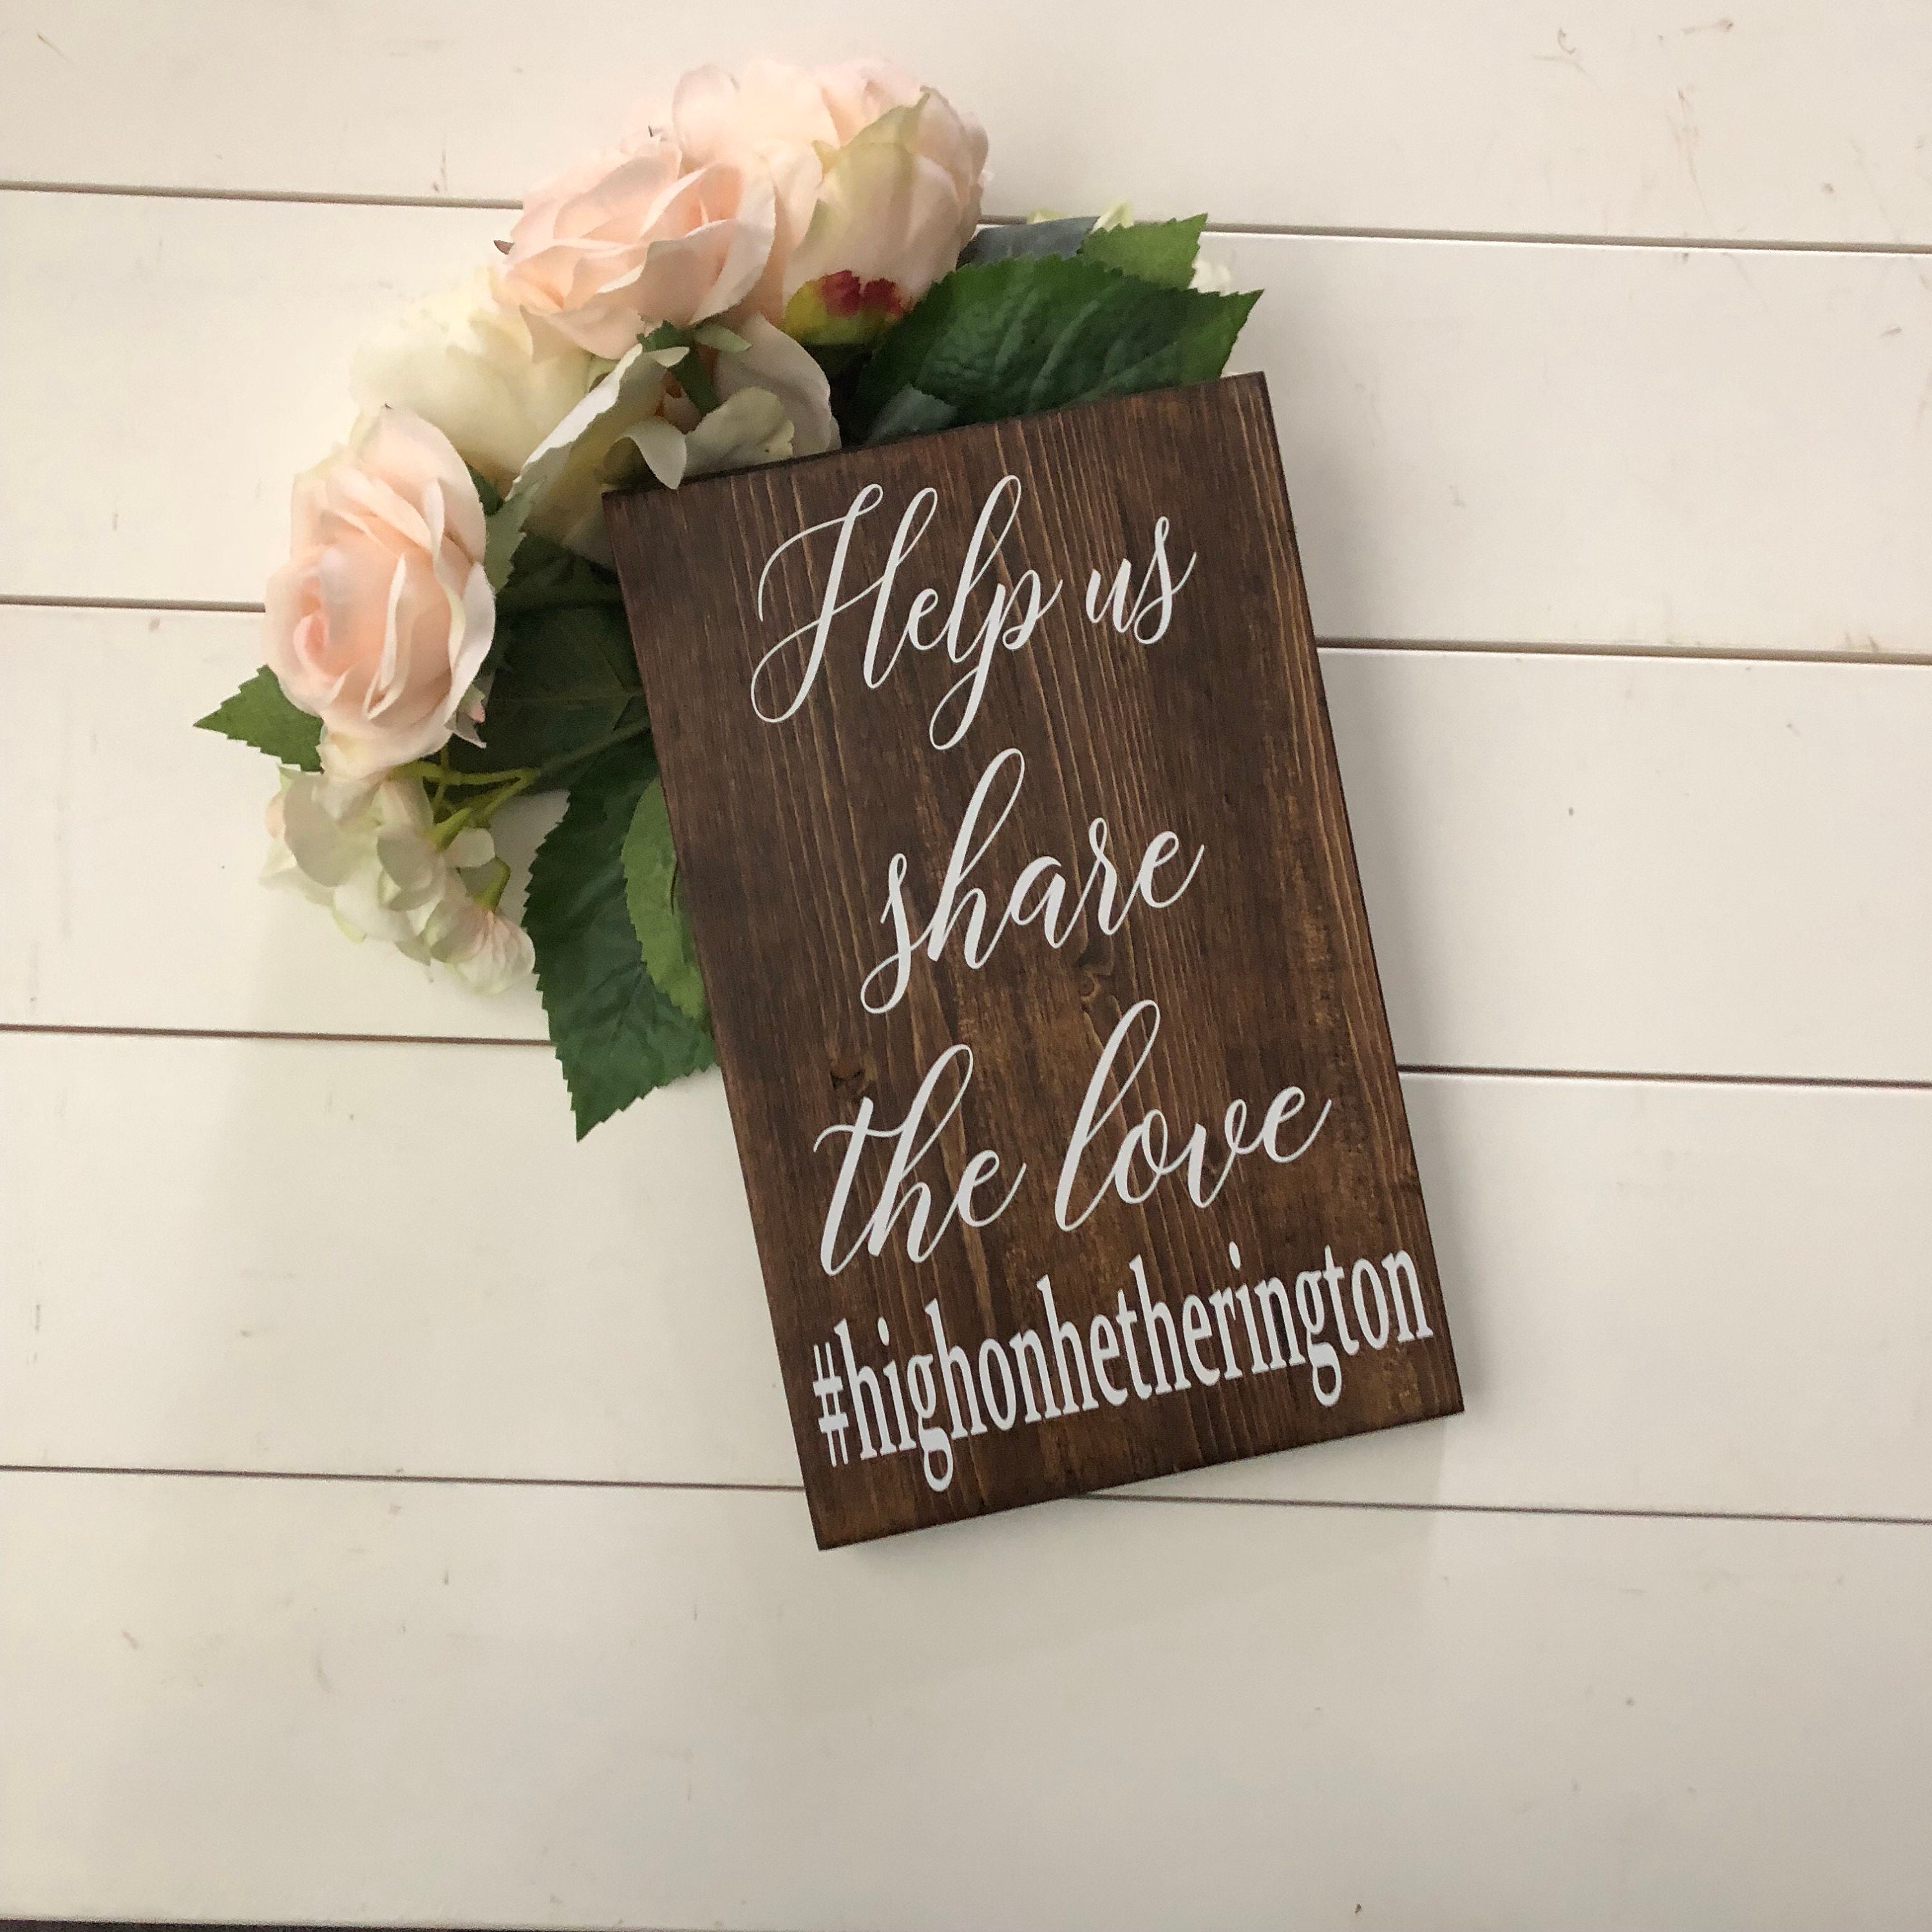 Share the Love Hashtag Sign, Wedding Table Sign, Help Capture the Love